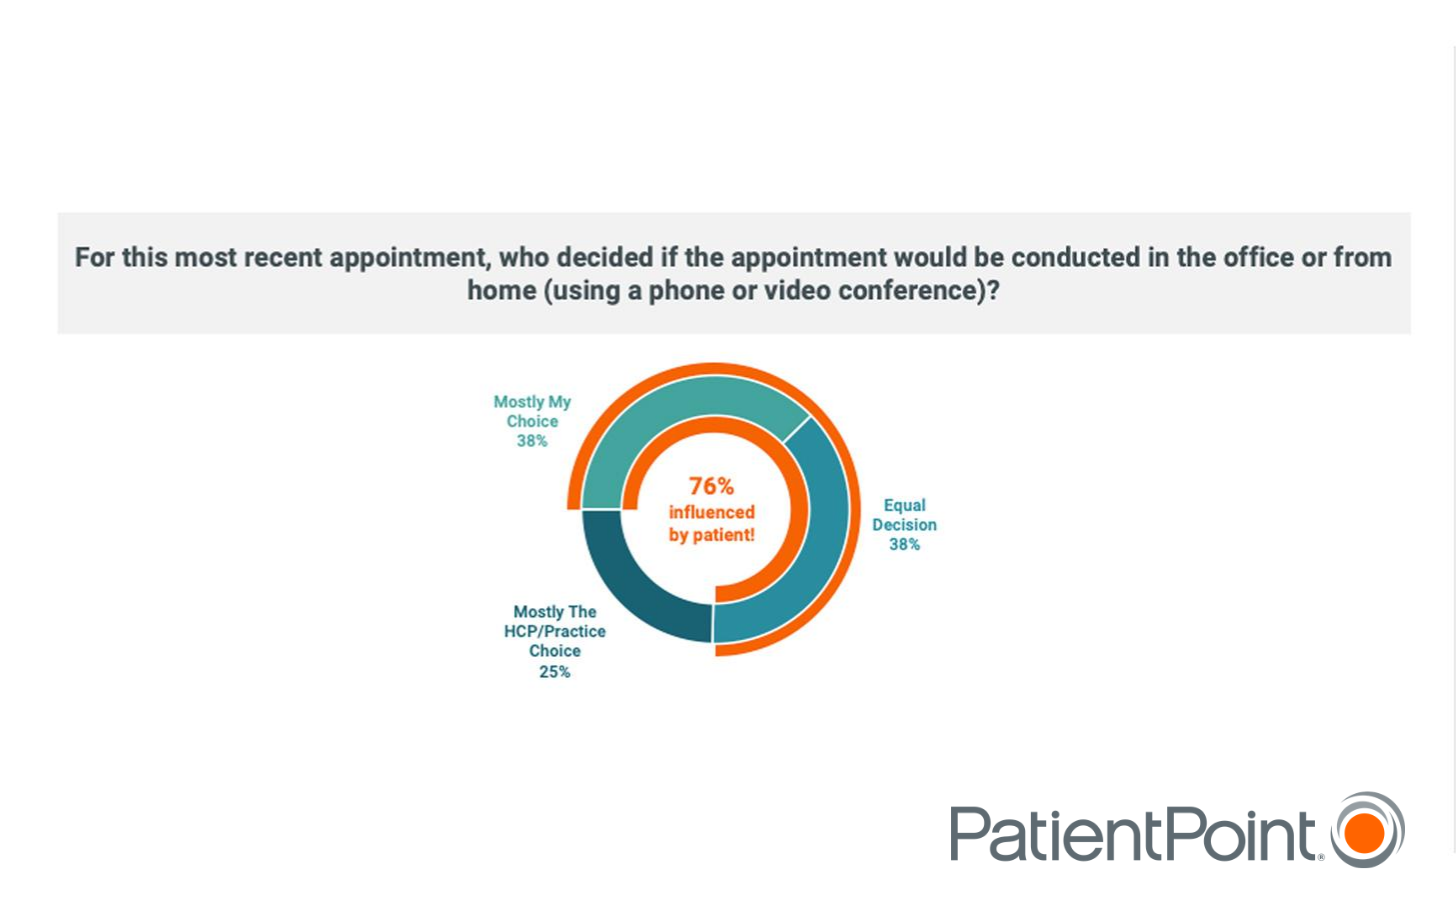 A graph depicting patient responses to a survey question showing that patients are largely in control over their appointments.